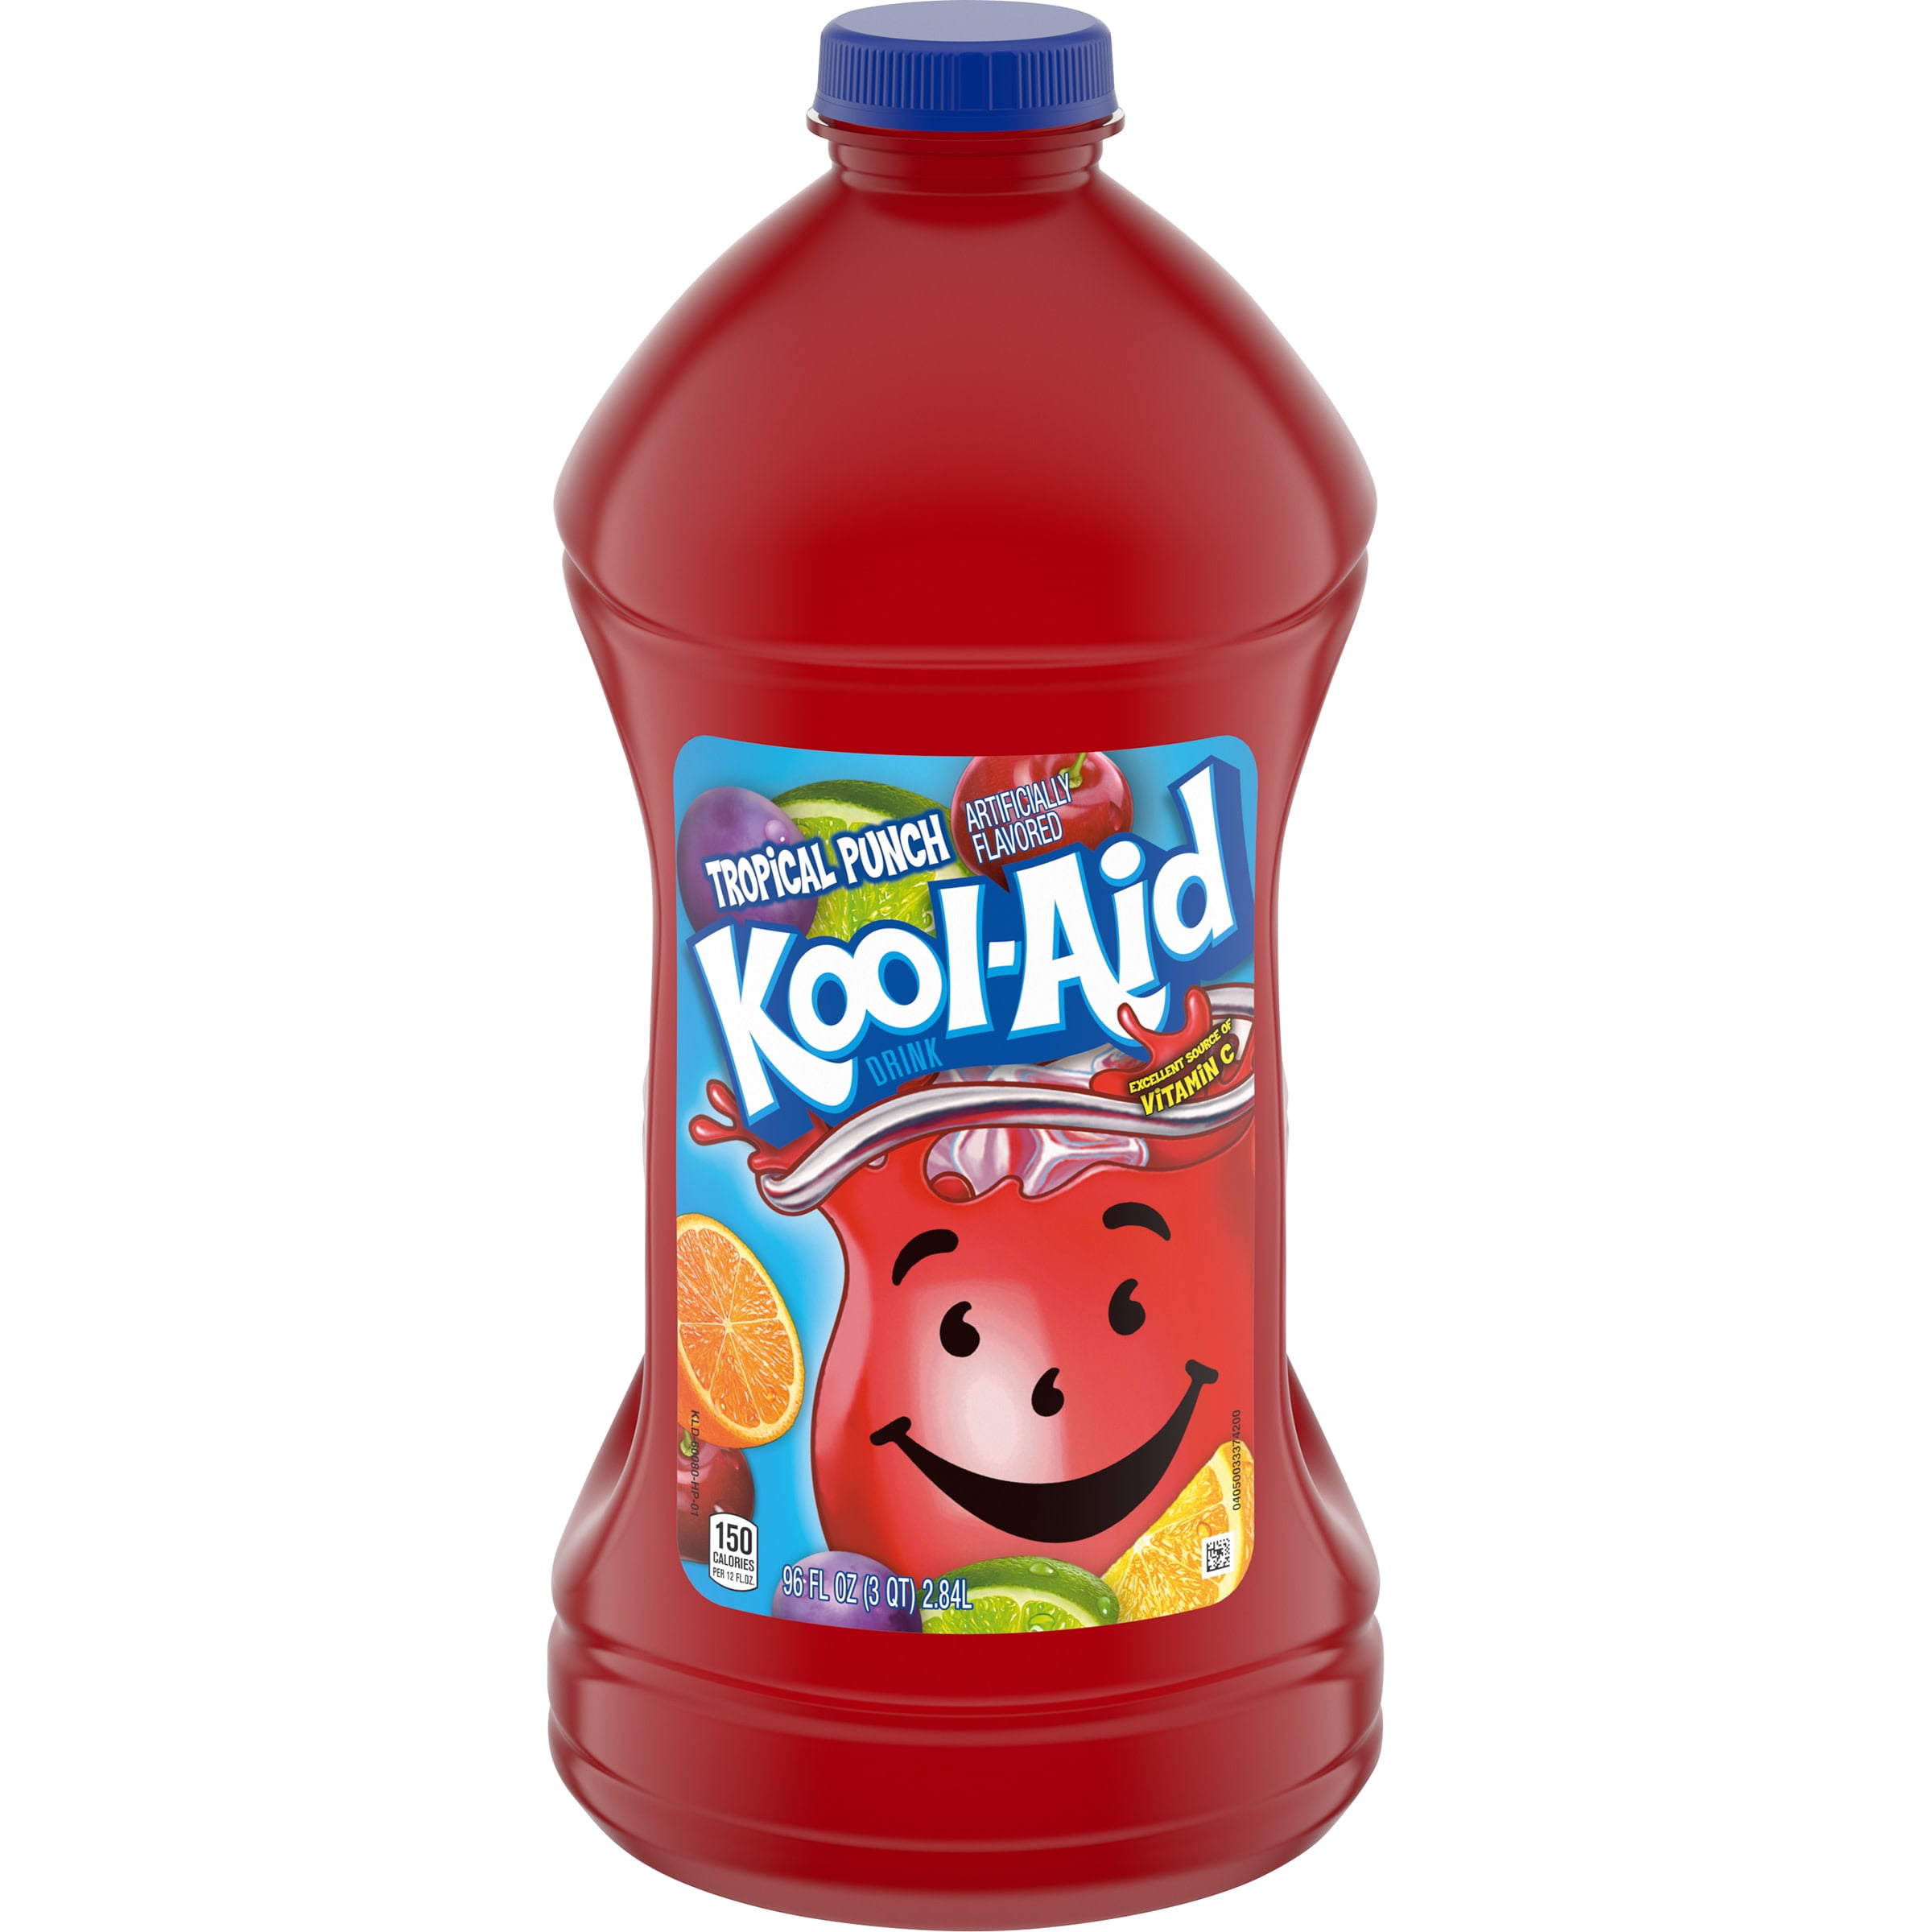 Albums 96+ Images pictures of kool-aid Full HD, 2k, 4k